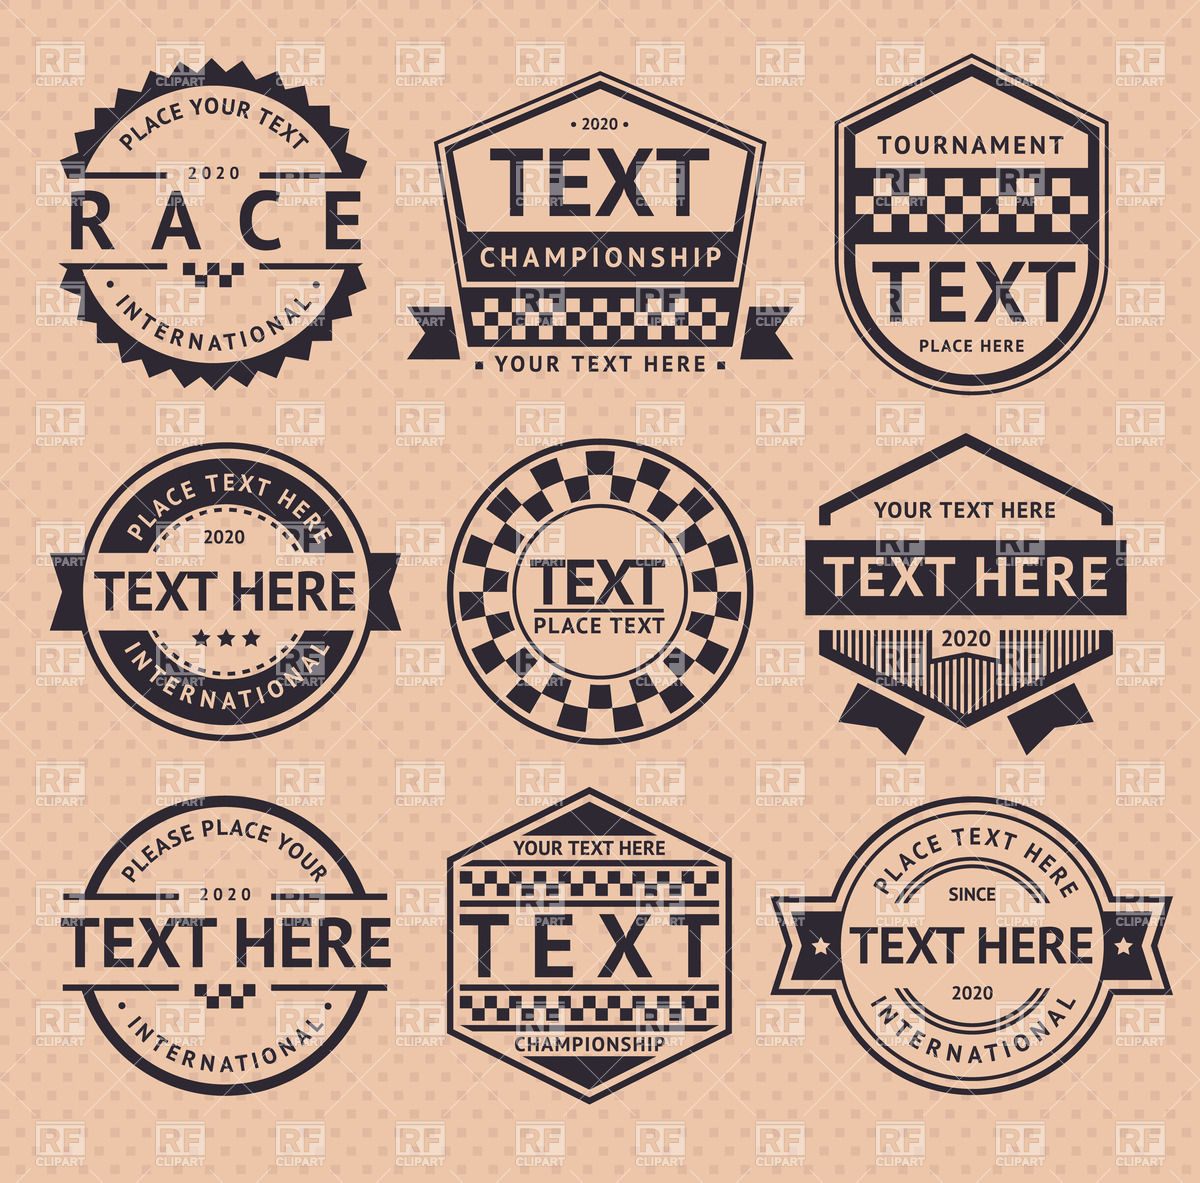 Vintage Style Sepia Racing Emblems 17267 Download Royalty Free